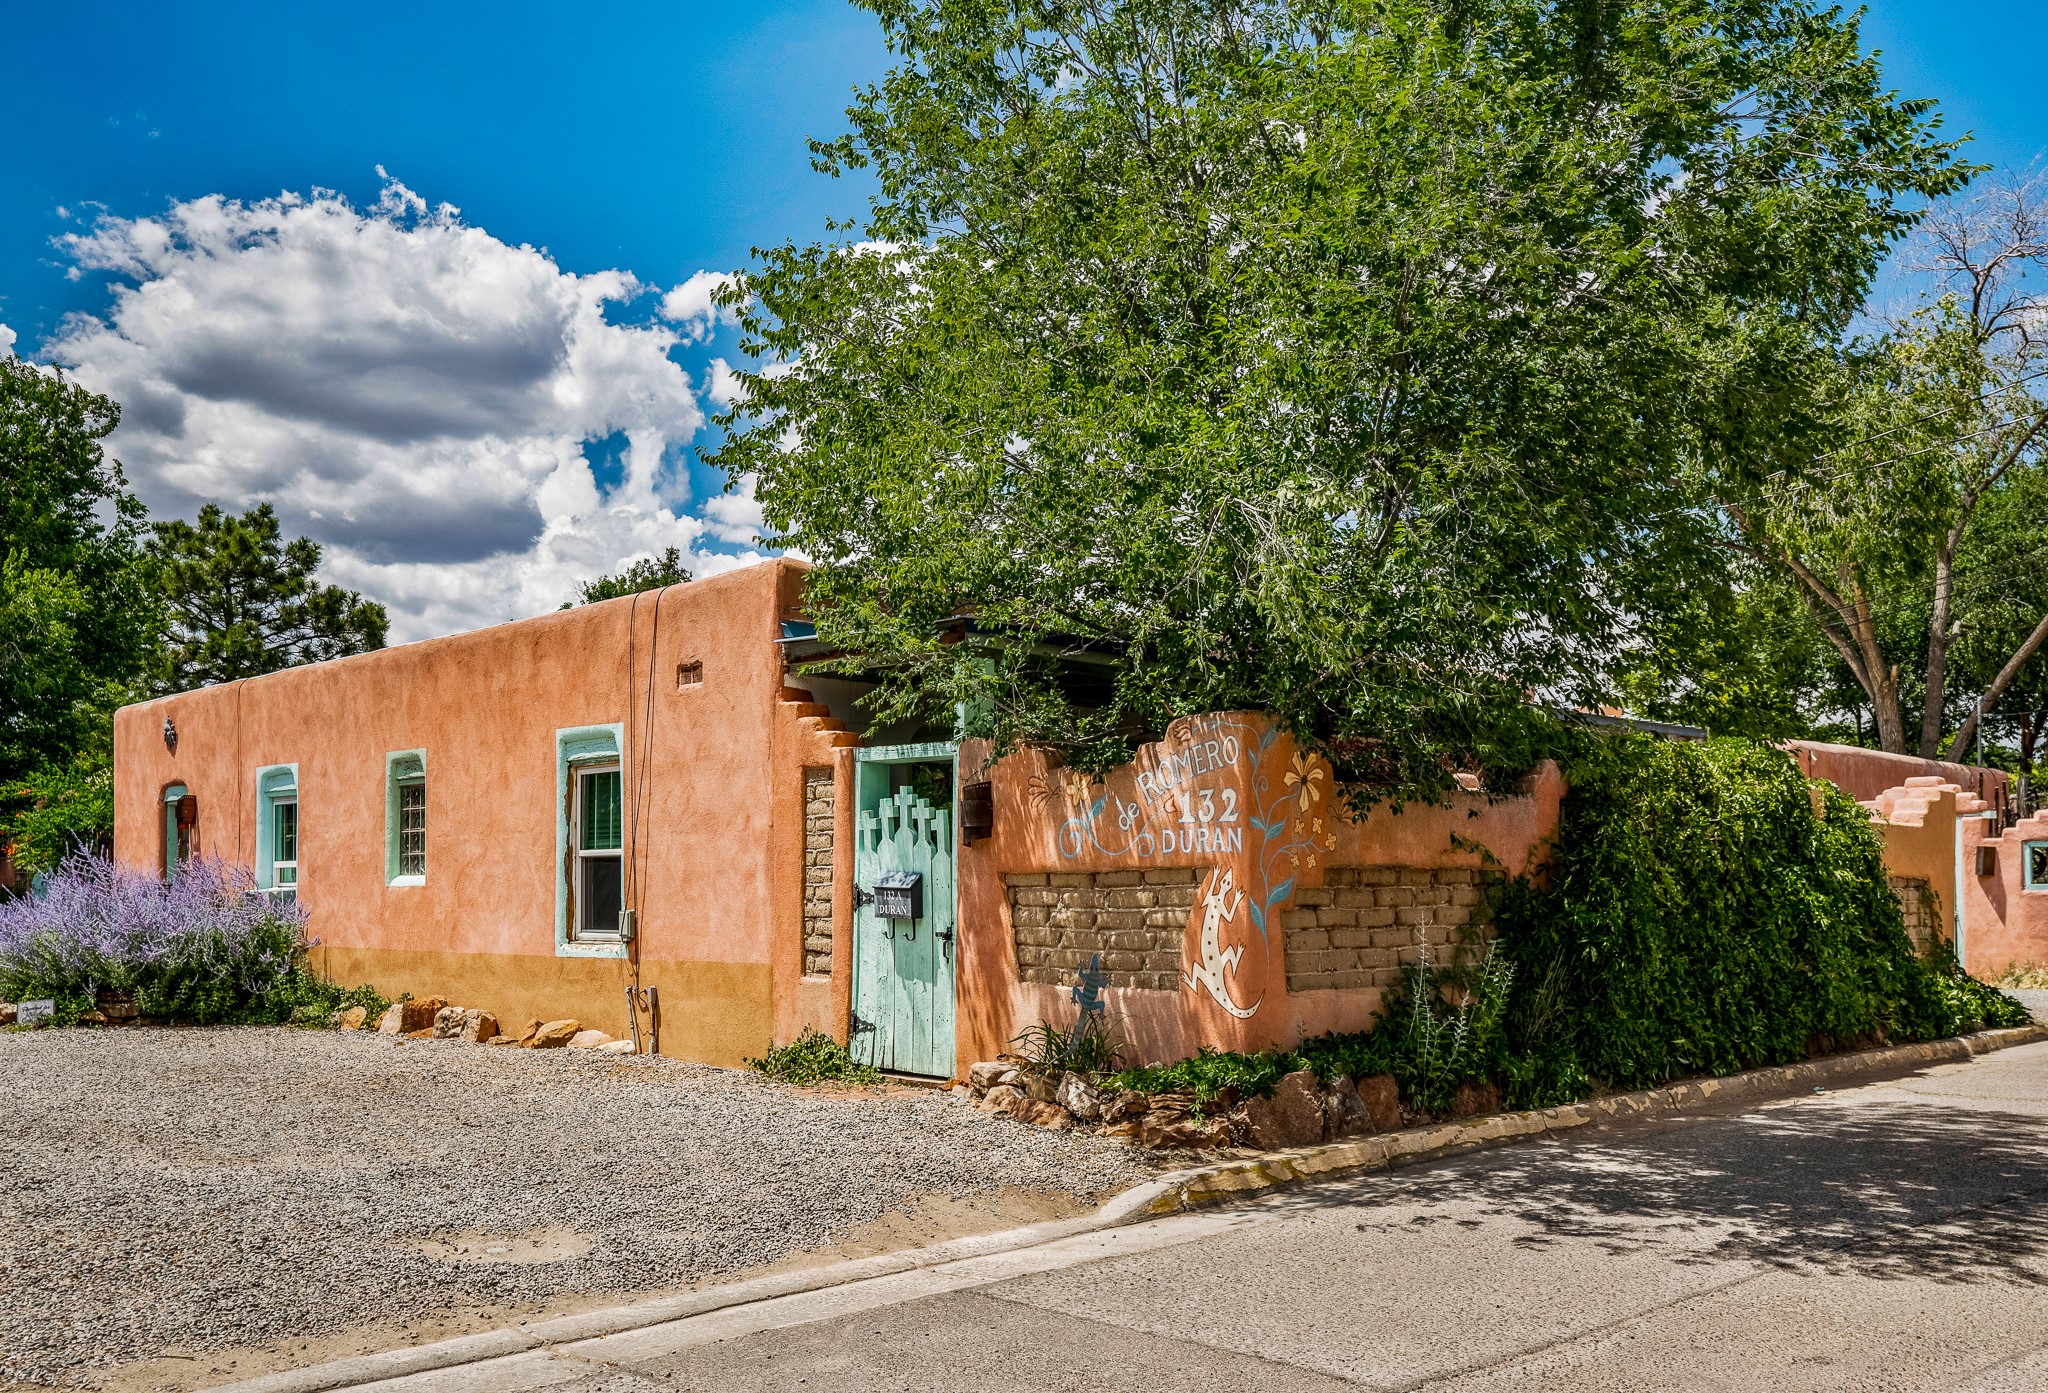 132 Duran Street A, Santa Fe, New Mexico 87501, 1 Bedroom Bedrooms, ,1 BathroomBathrooms,Residential,For Sale,132 Duran Street A,202338926